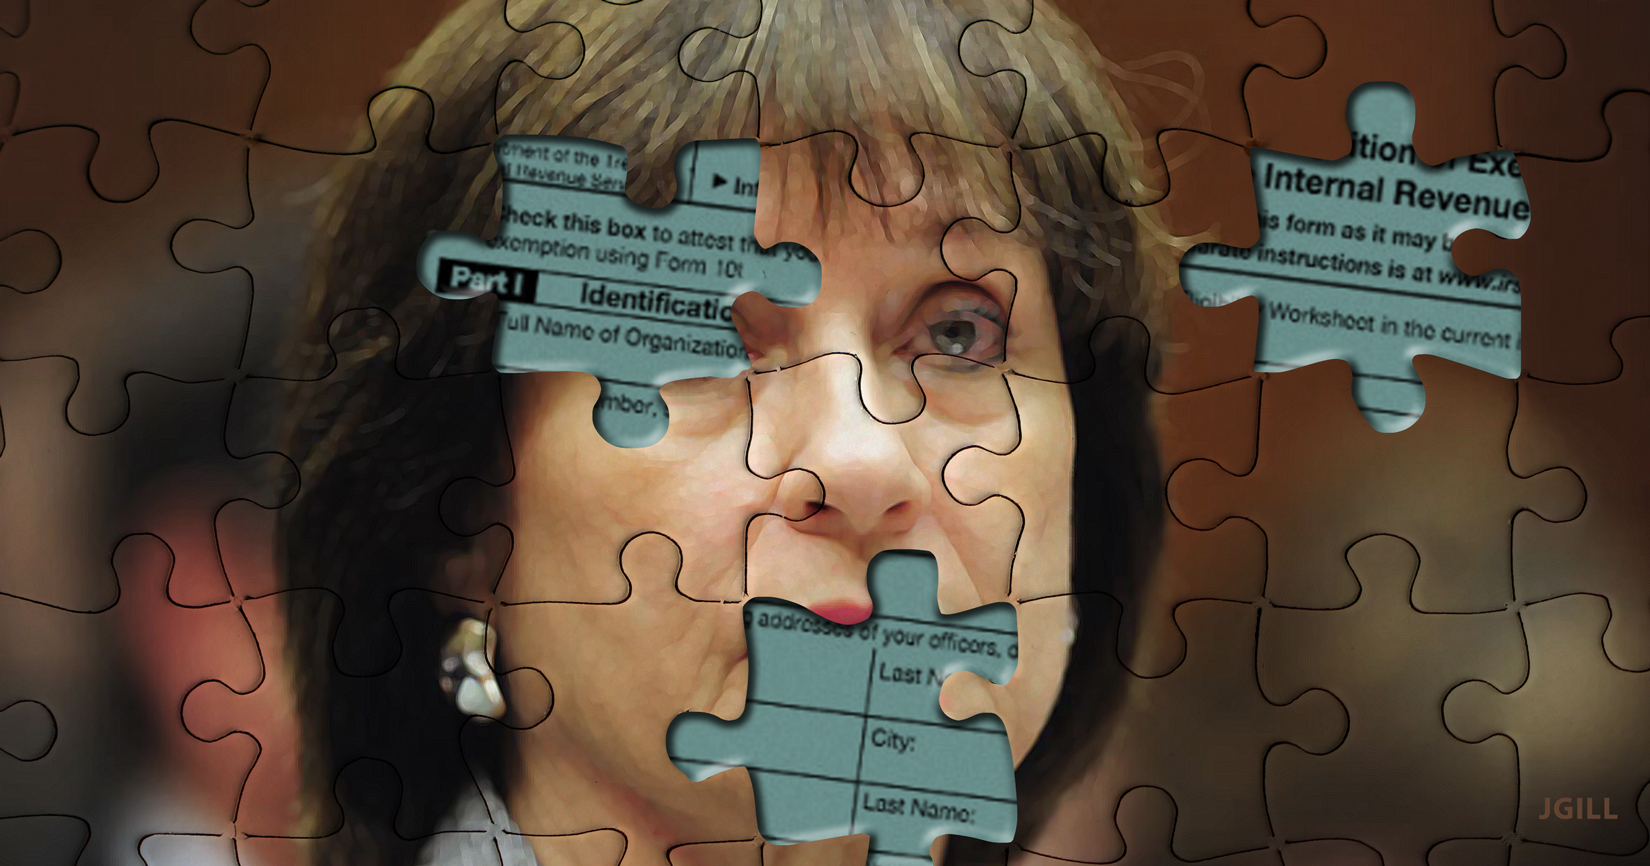 Lois Lerner, IRS, collage, photomontage, puzzle, investigation, illustration, editorial, abuse, law, foundations, harassment,